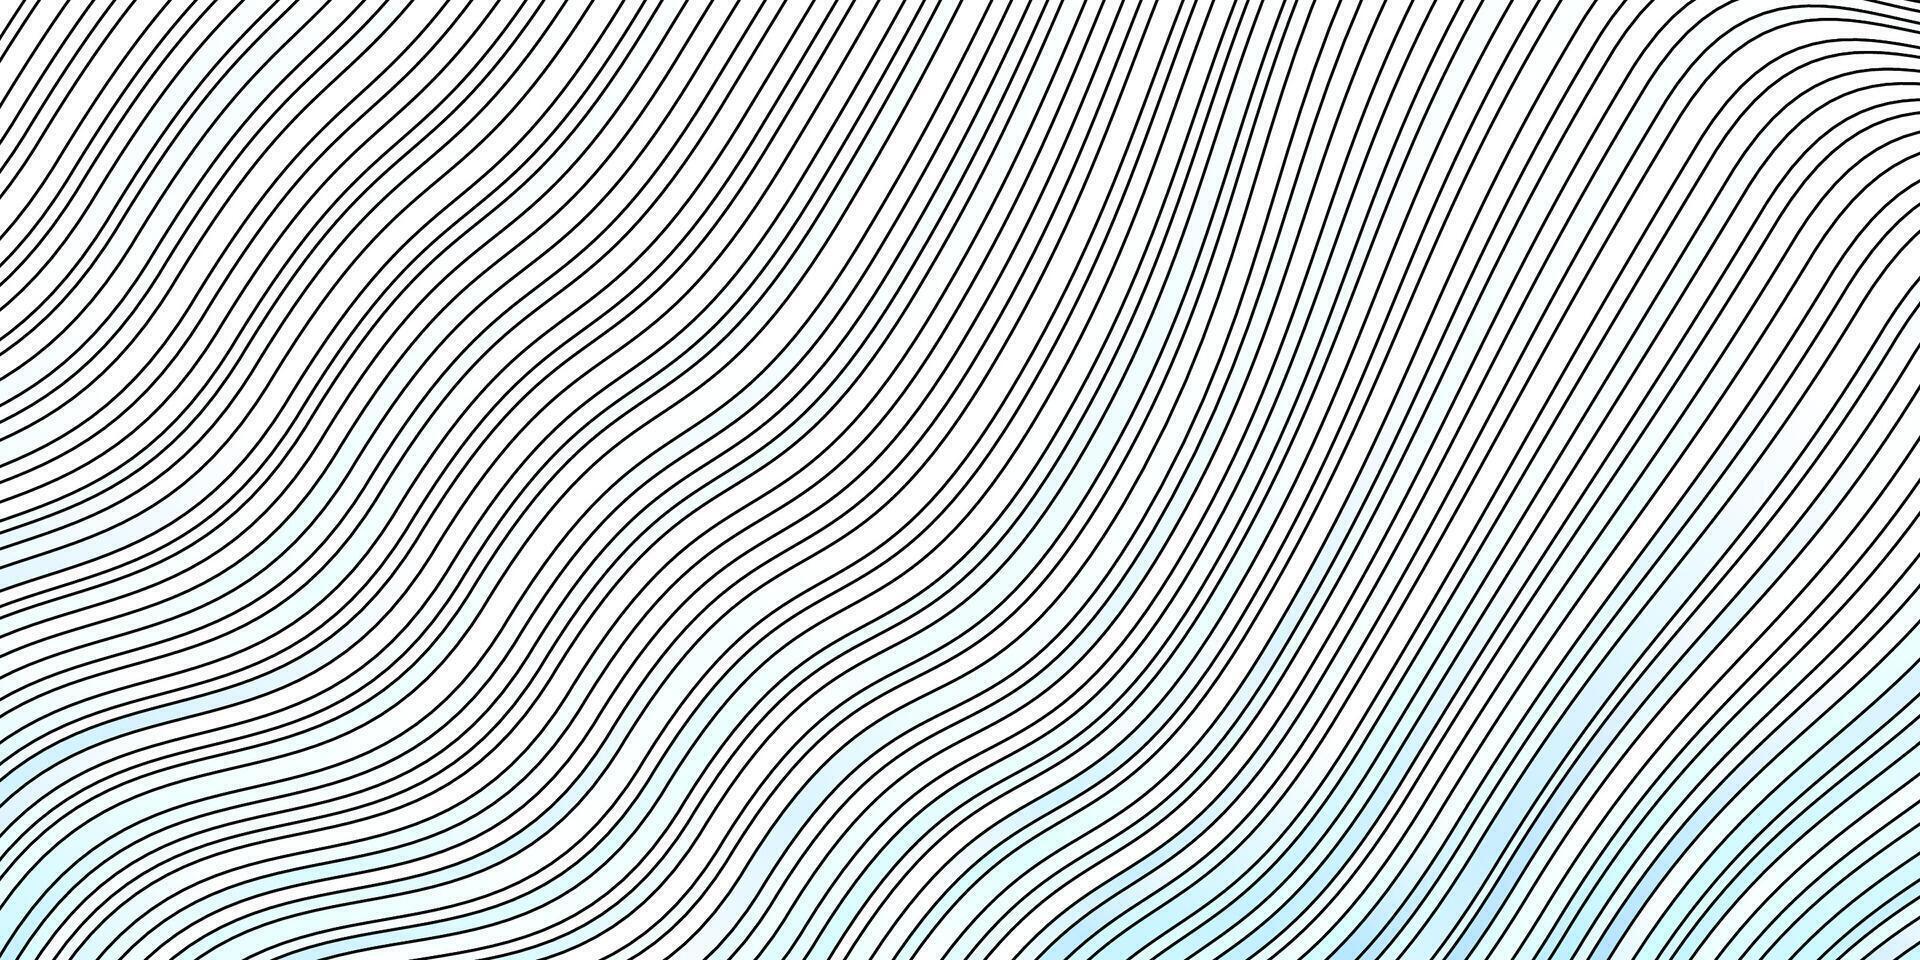 Light BLUE pattern with curved lines. vector